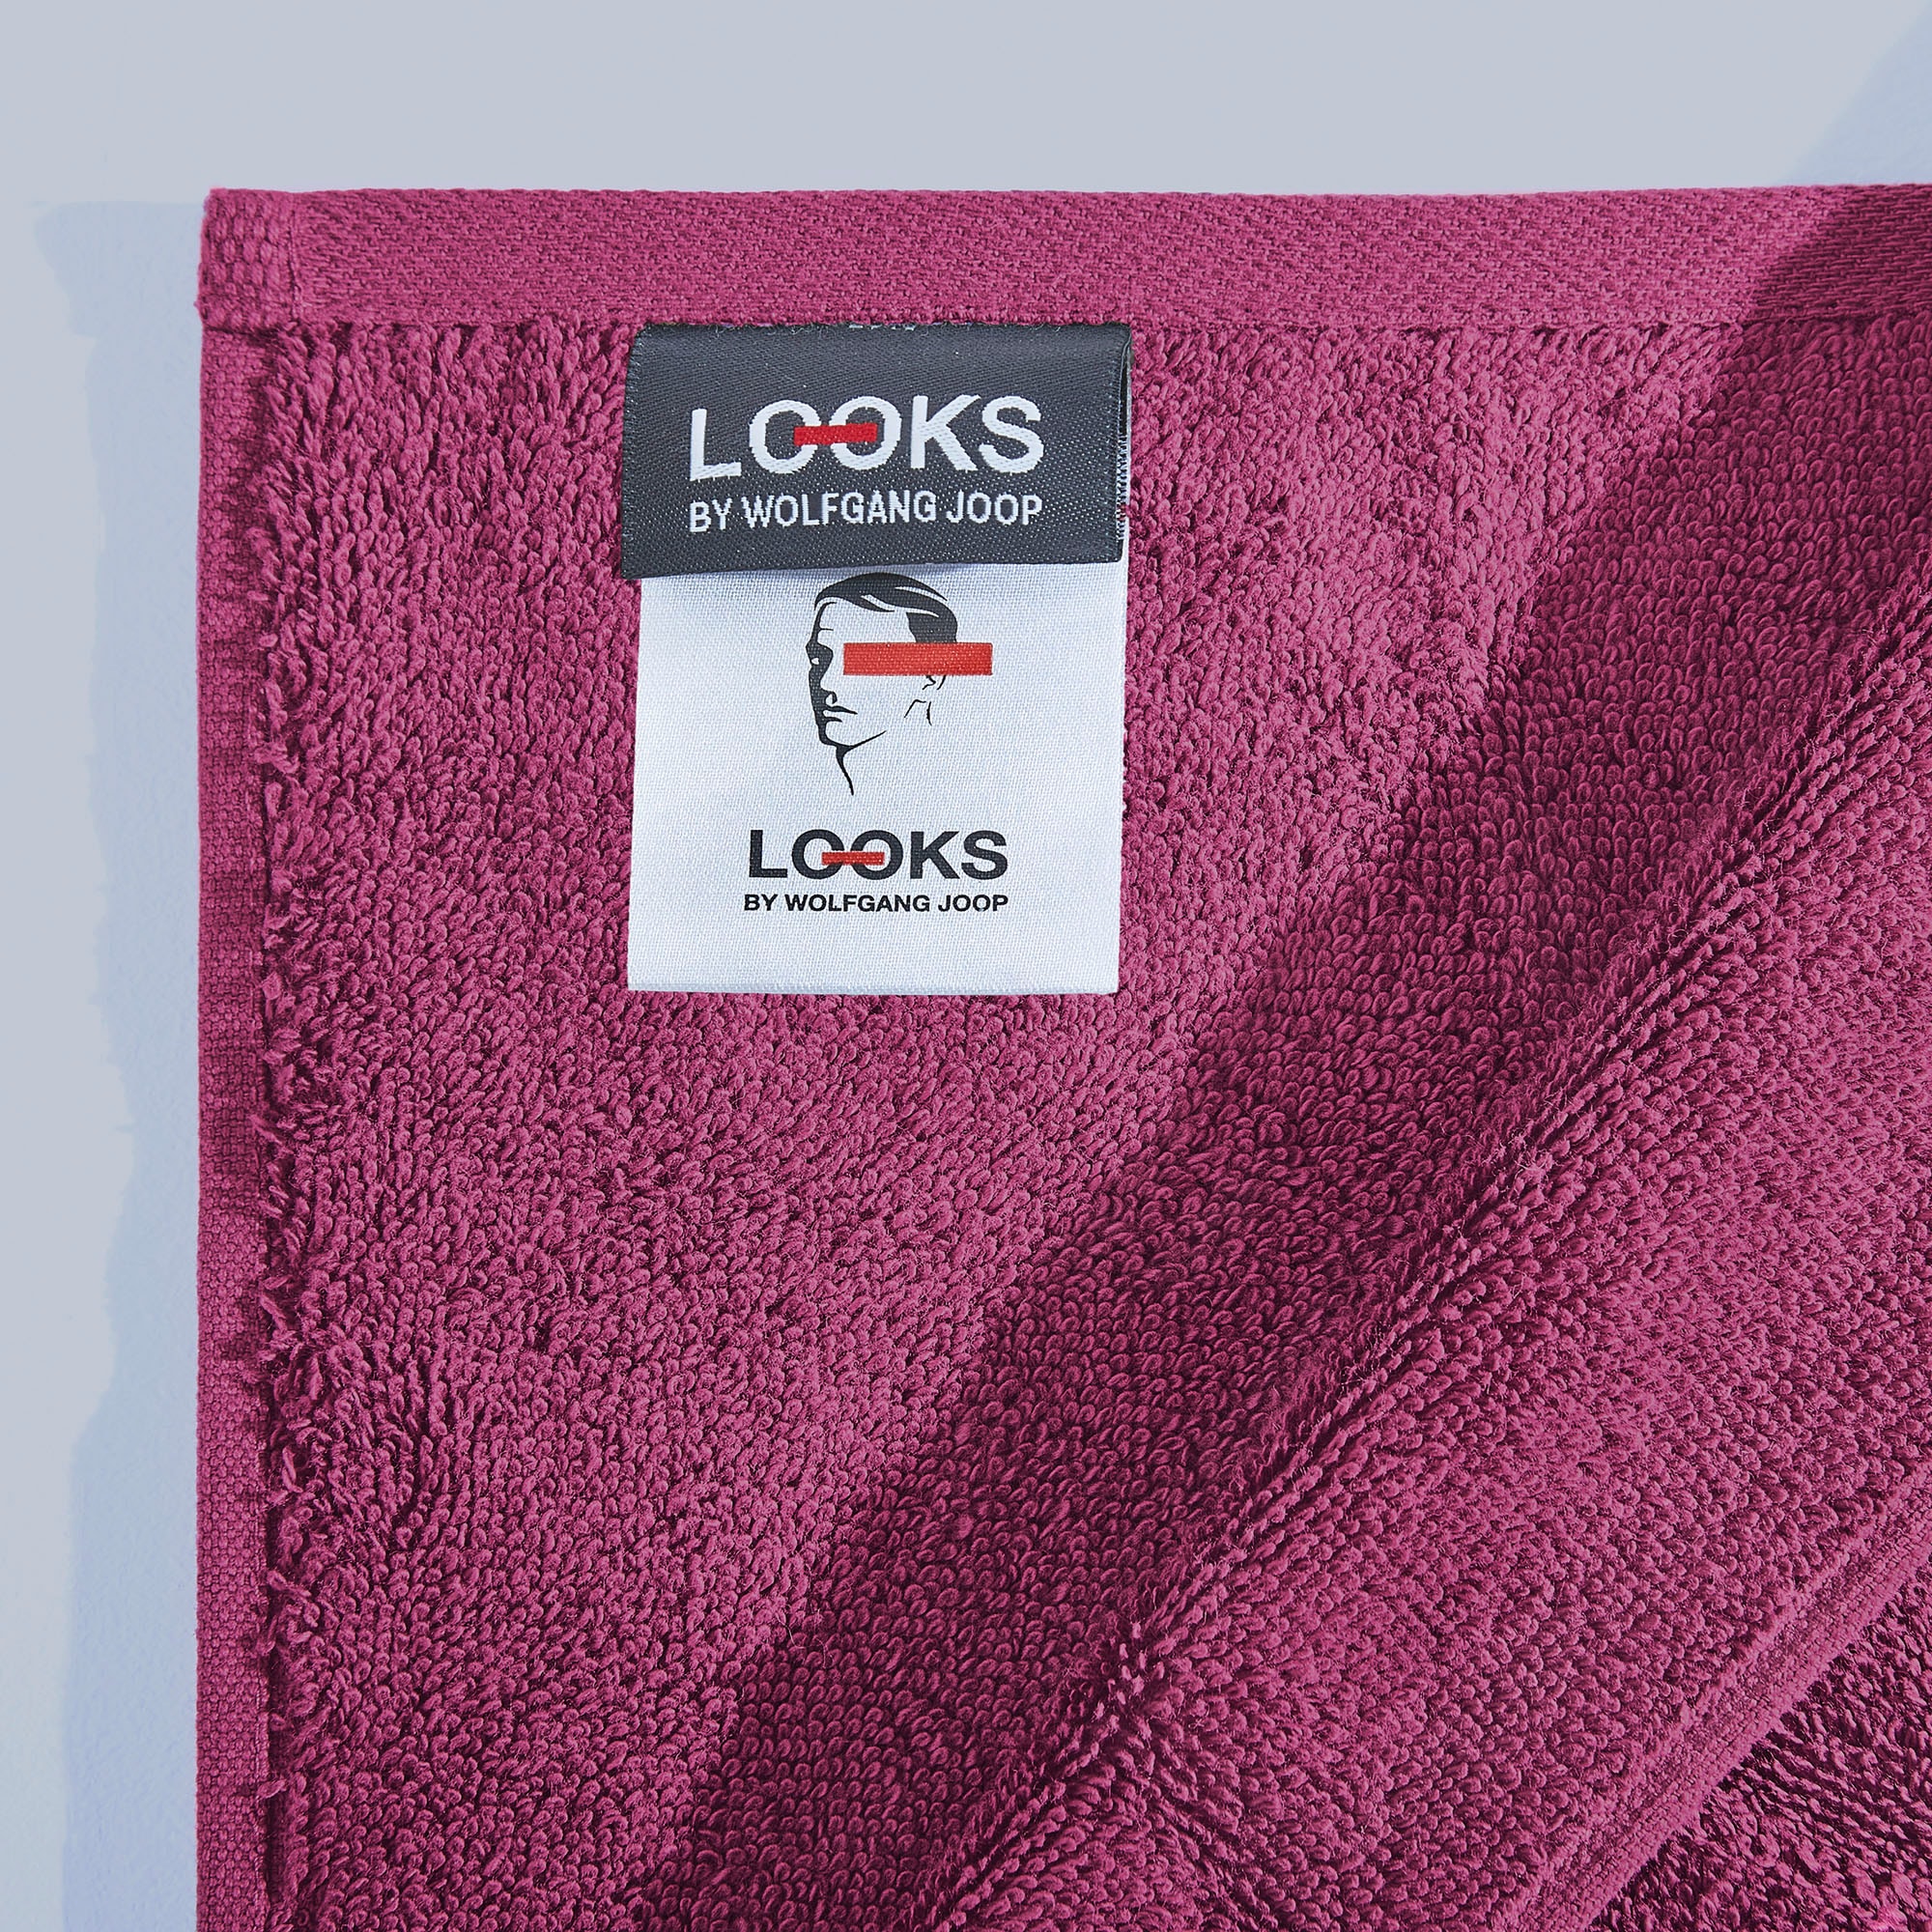 LOOKS by Wolfgang Joop Duschtuch »LOOKS«, (1 St.), mit Logobestickung